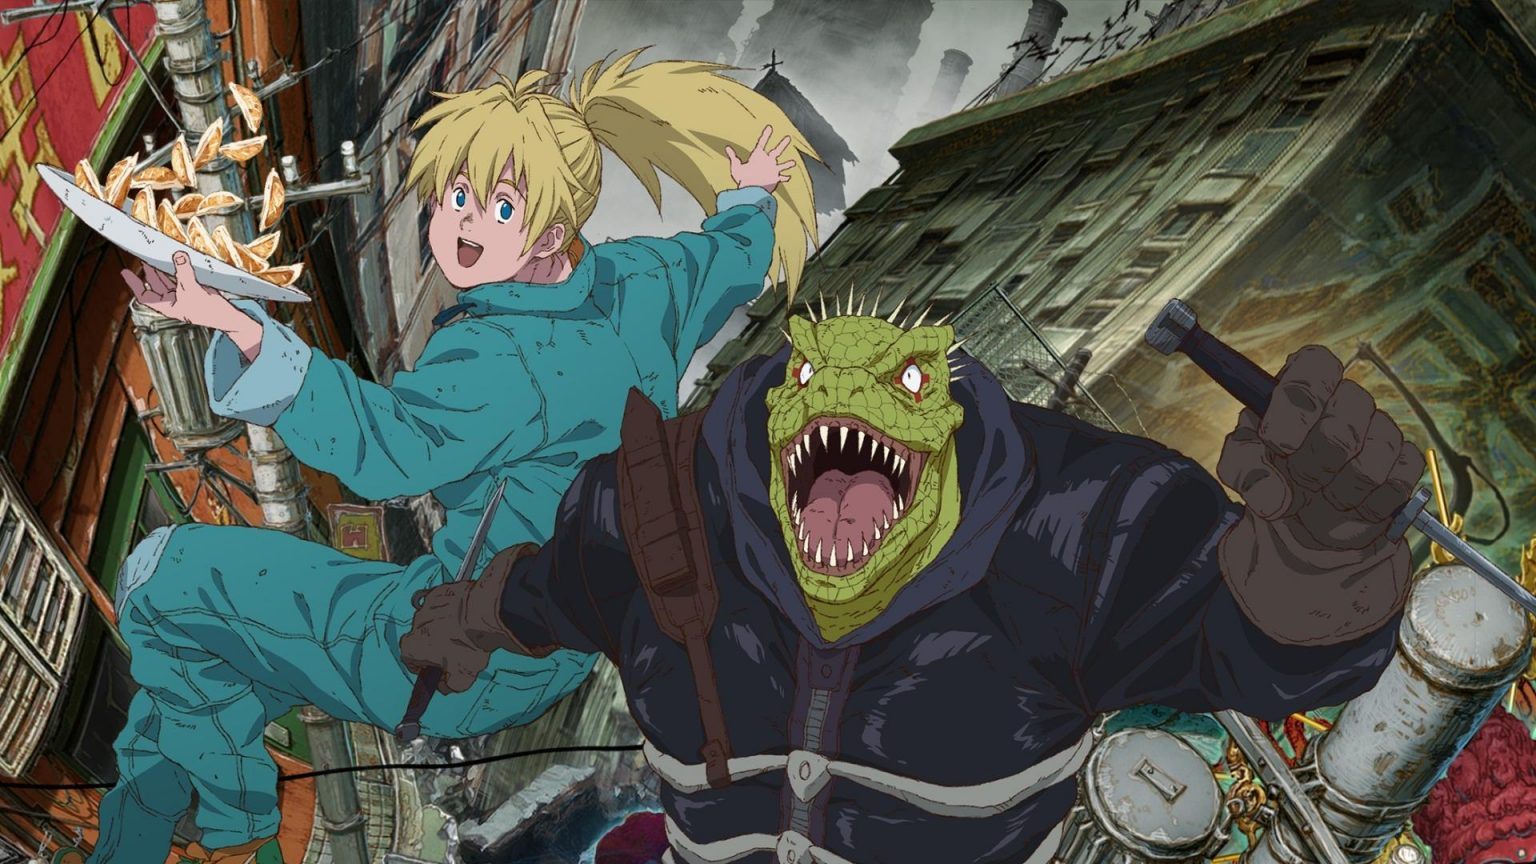 Best 8 Action Anime 2020 To watch: Best From Rest Edition